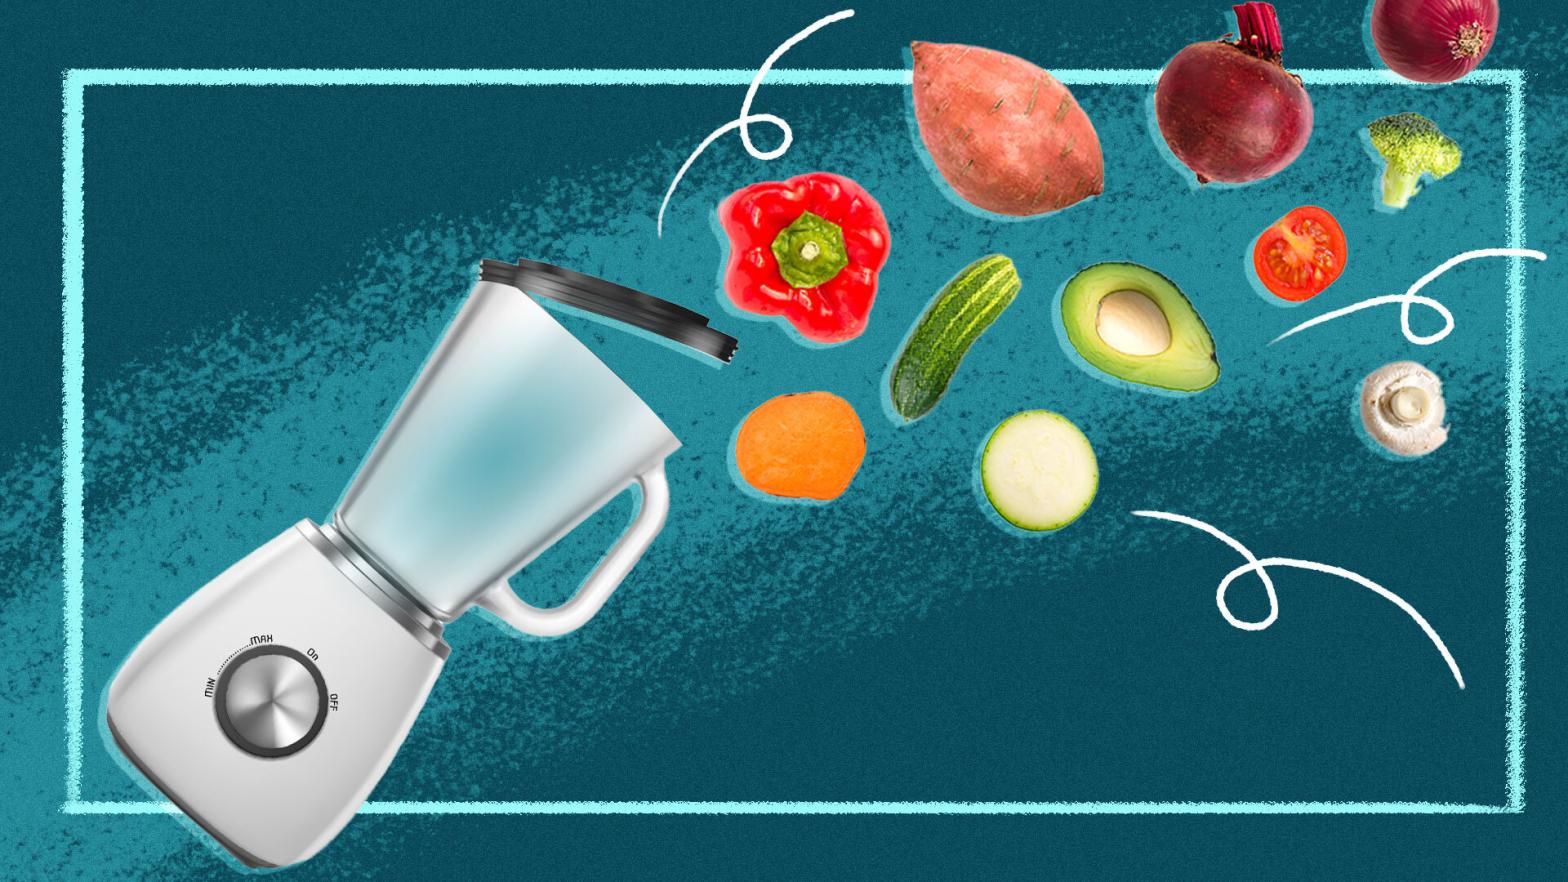 Everything to Consider When Buying a Food Processor